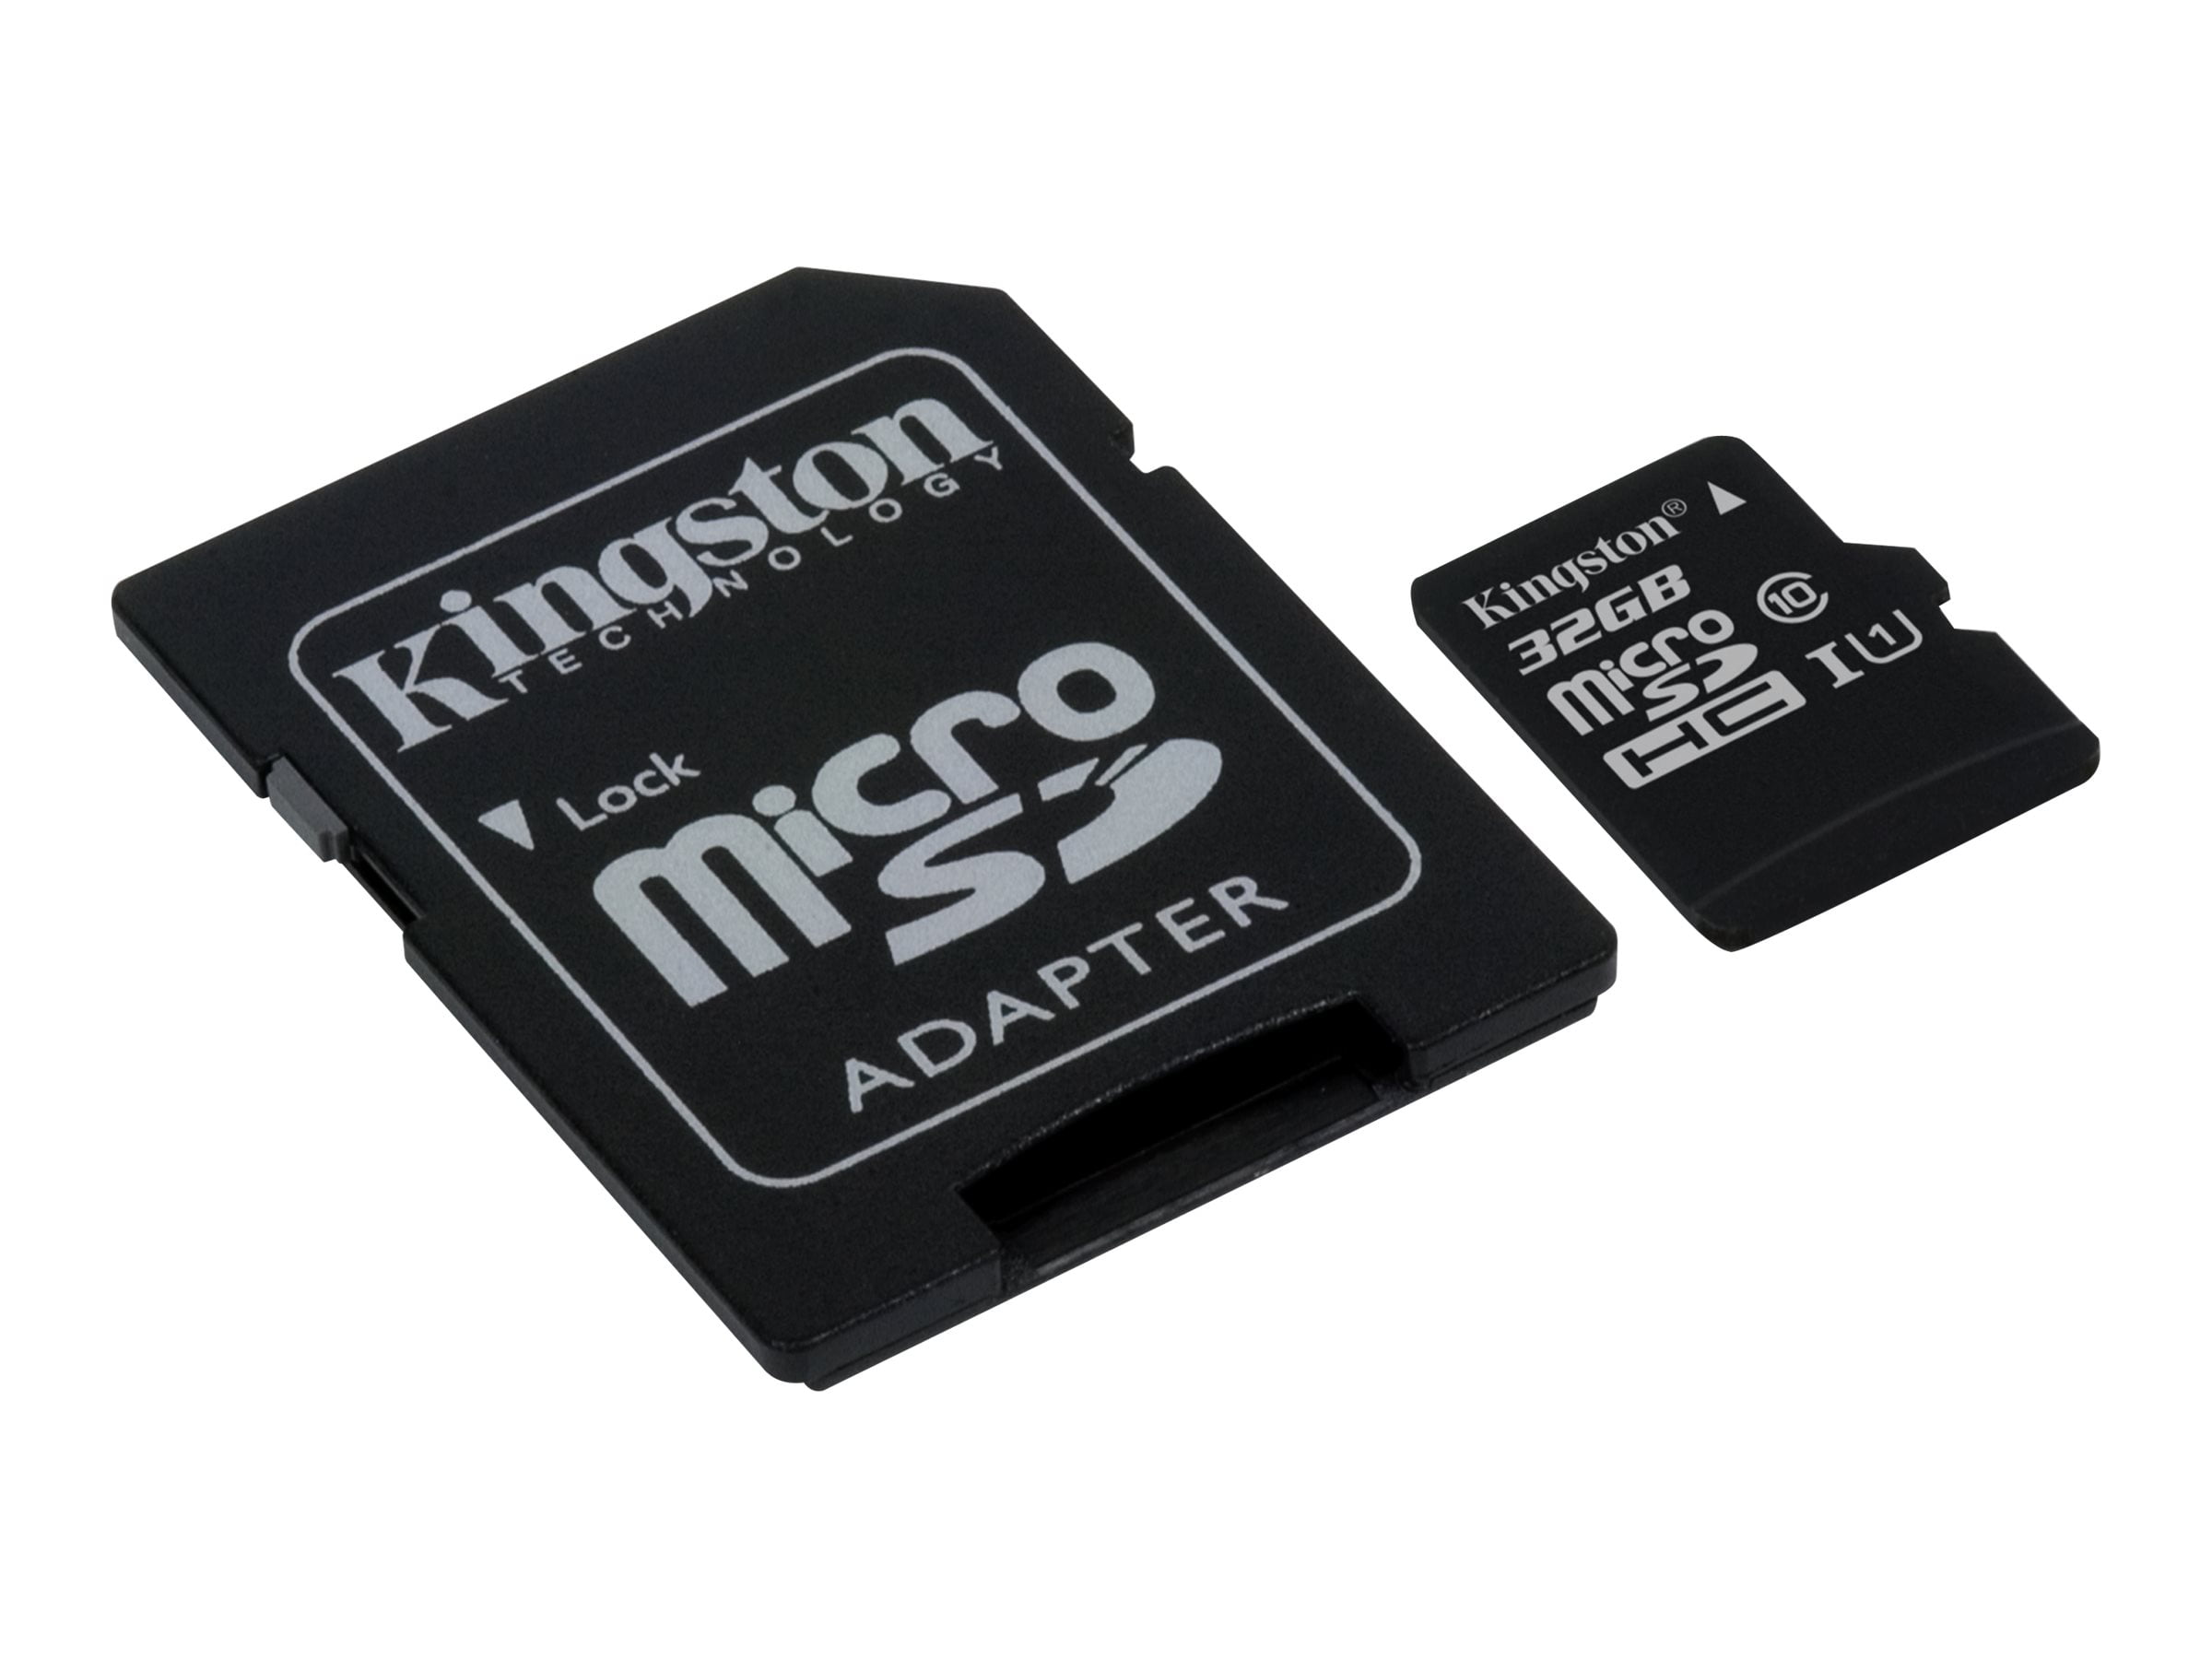 100MBs Works with Kingston Kingston 32GB Samsung Galaxy Golden MicroSDHC Canvas Select Plus Card Verified by SanFlash. 